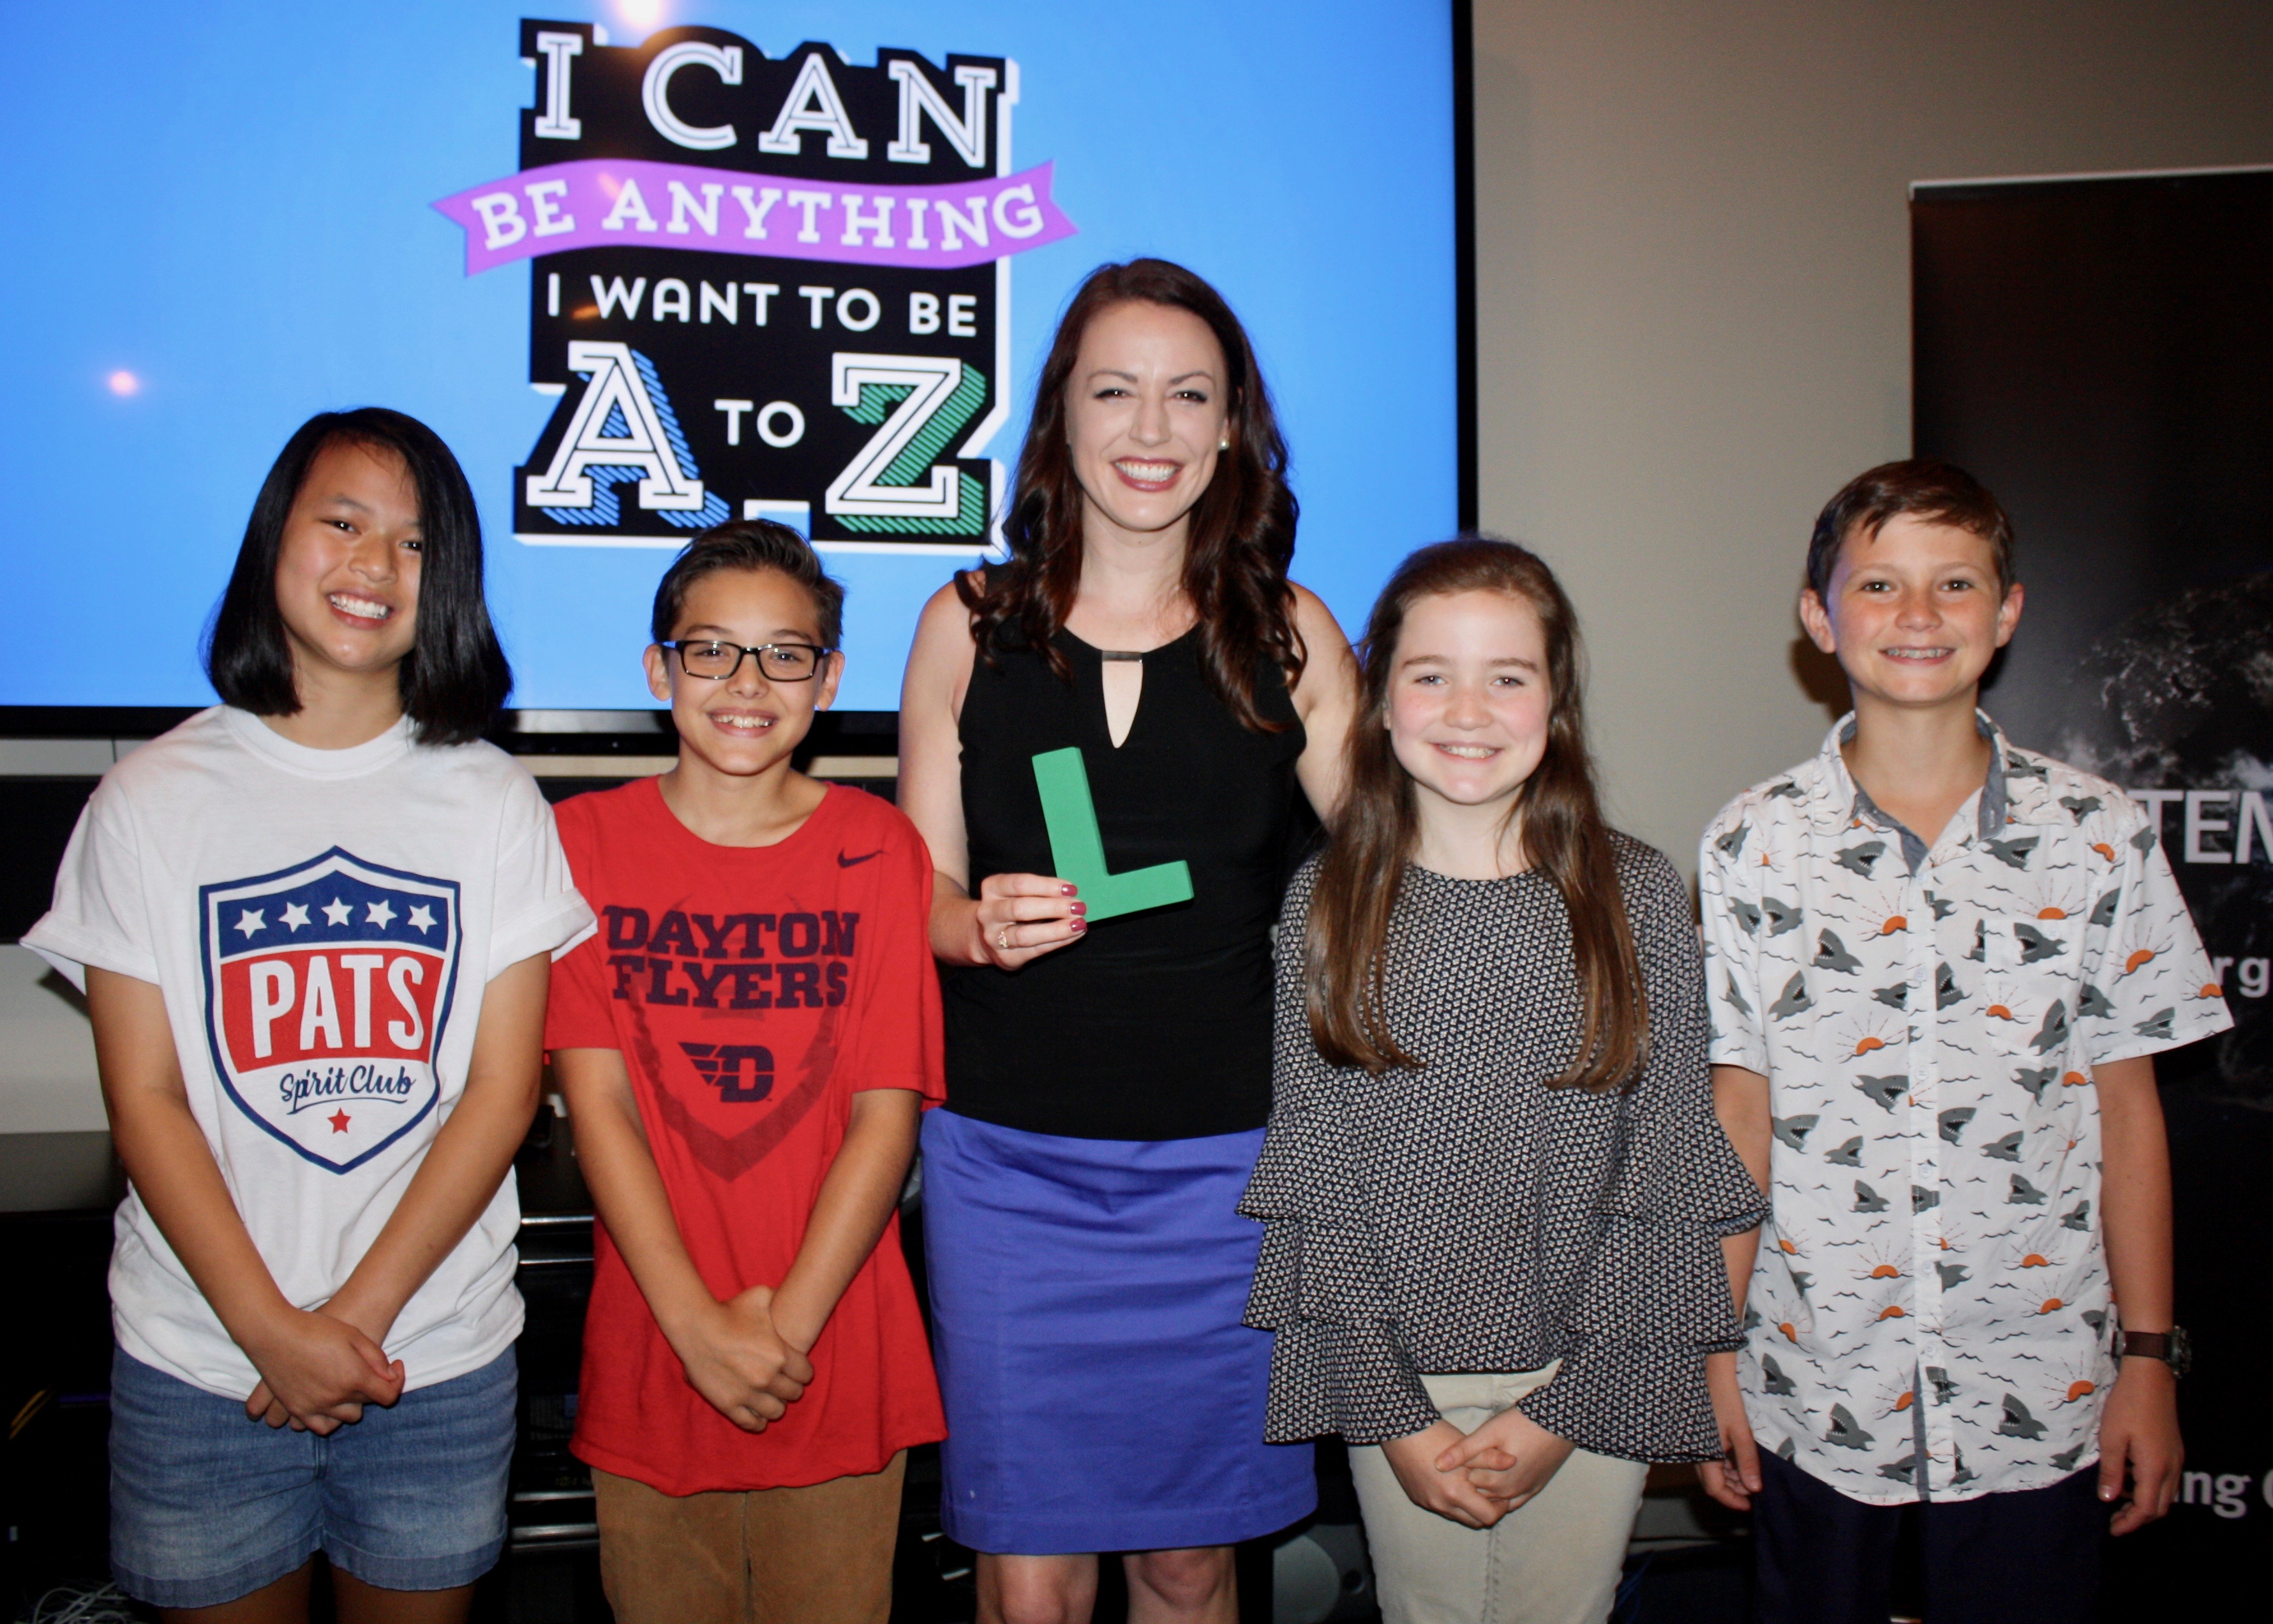 Katie Wright with kids from the show “I Can be Anything I Want to Be, A to Z."